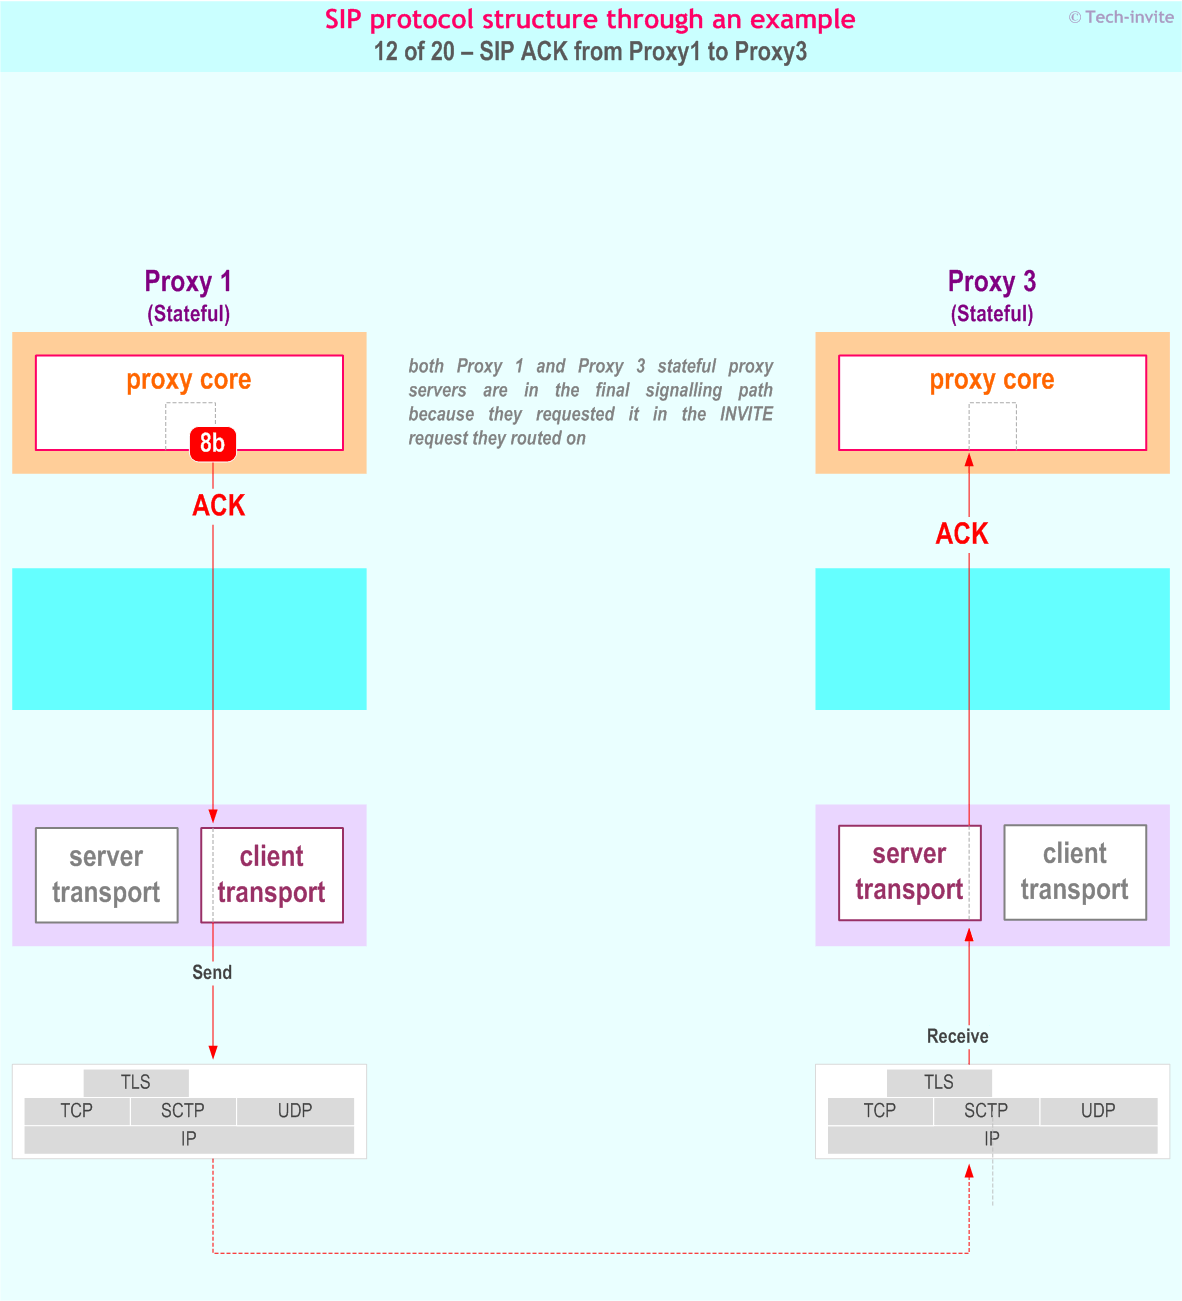 SIP protocol structure through an example: SIP ACK from Proxy1 to Proxy3